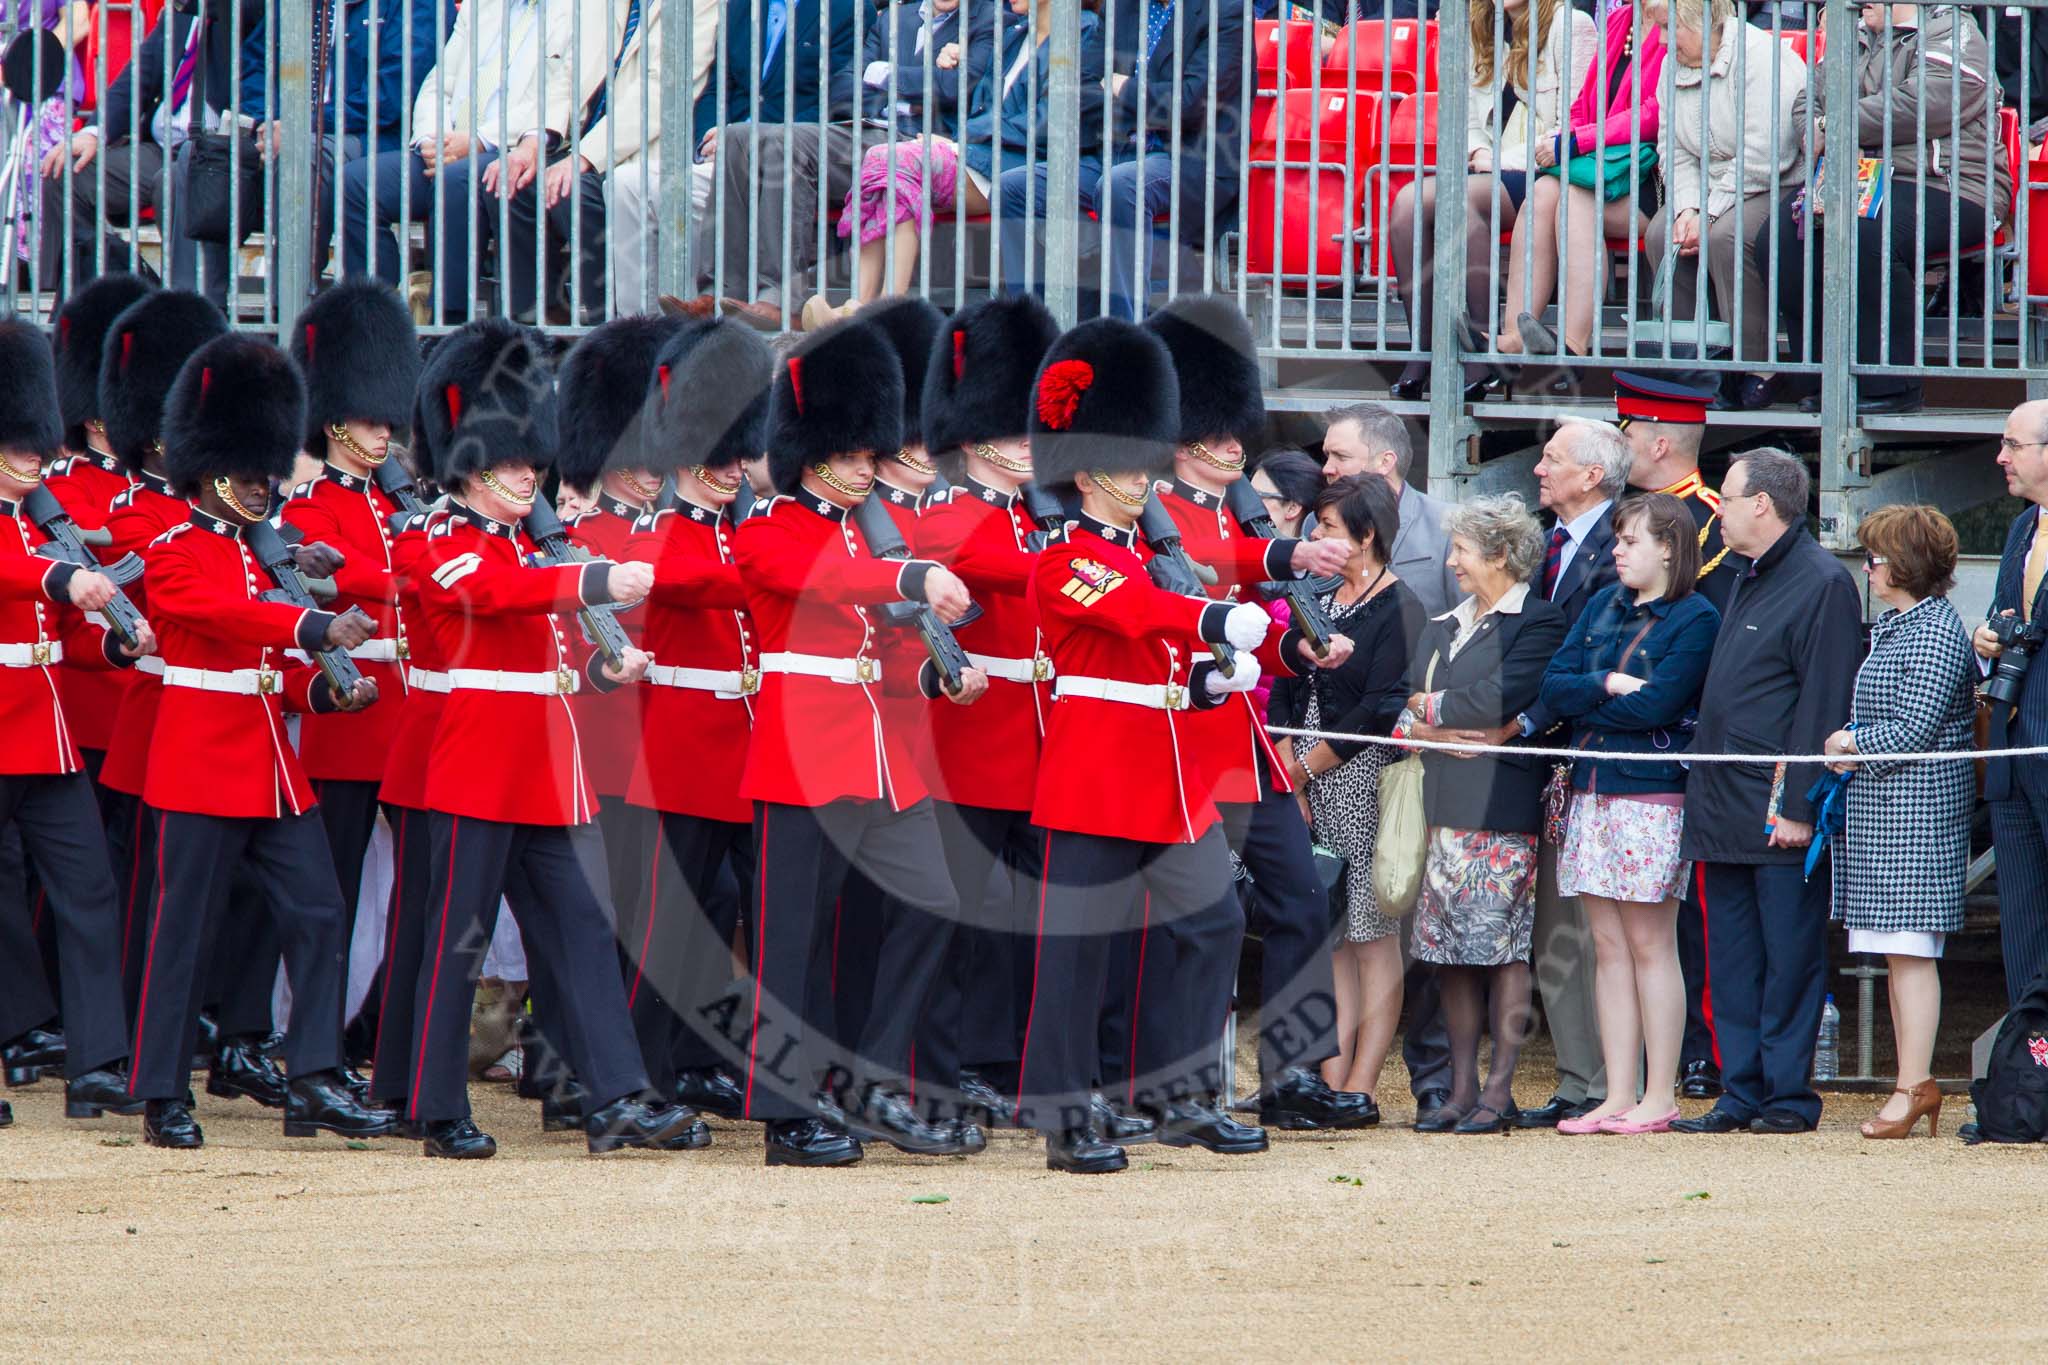 Trooping the Colour 2013: No. 6 Guard, No. 7 Company Coldstream Guards are marching along the lines of spectators onto Horse Guards Parade. Image #73, 15 June 2013 10:22 Horse Guards Parade, London, UK